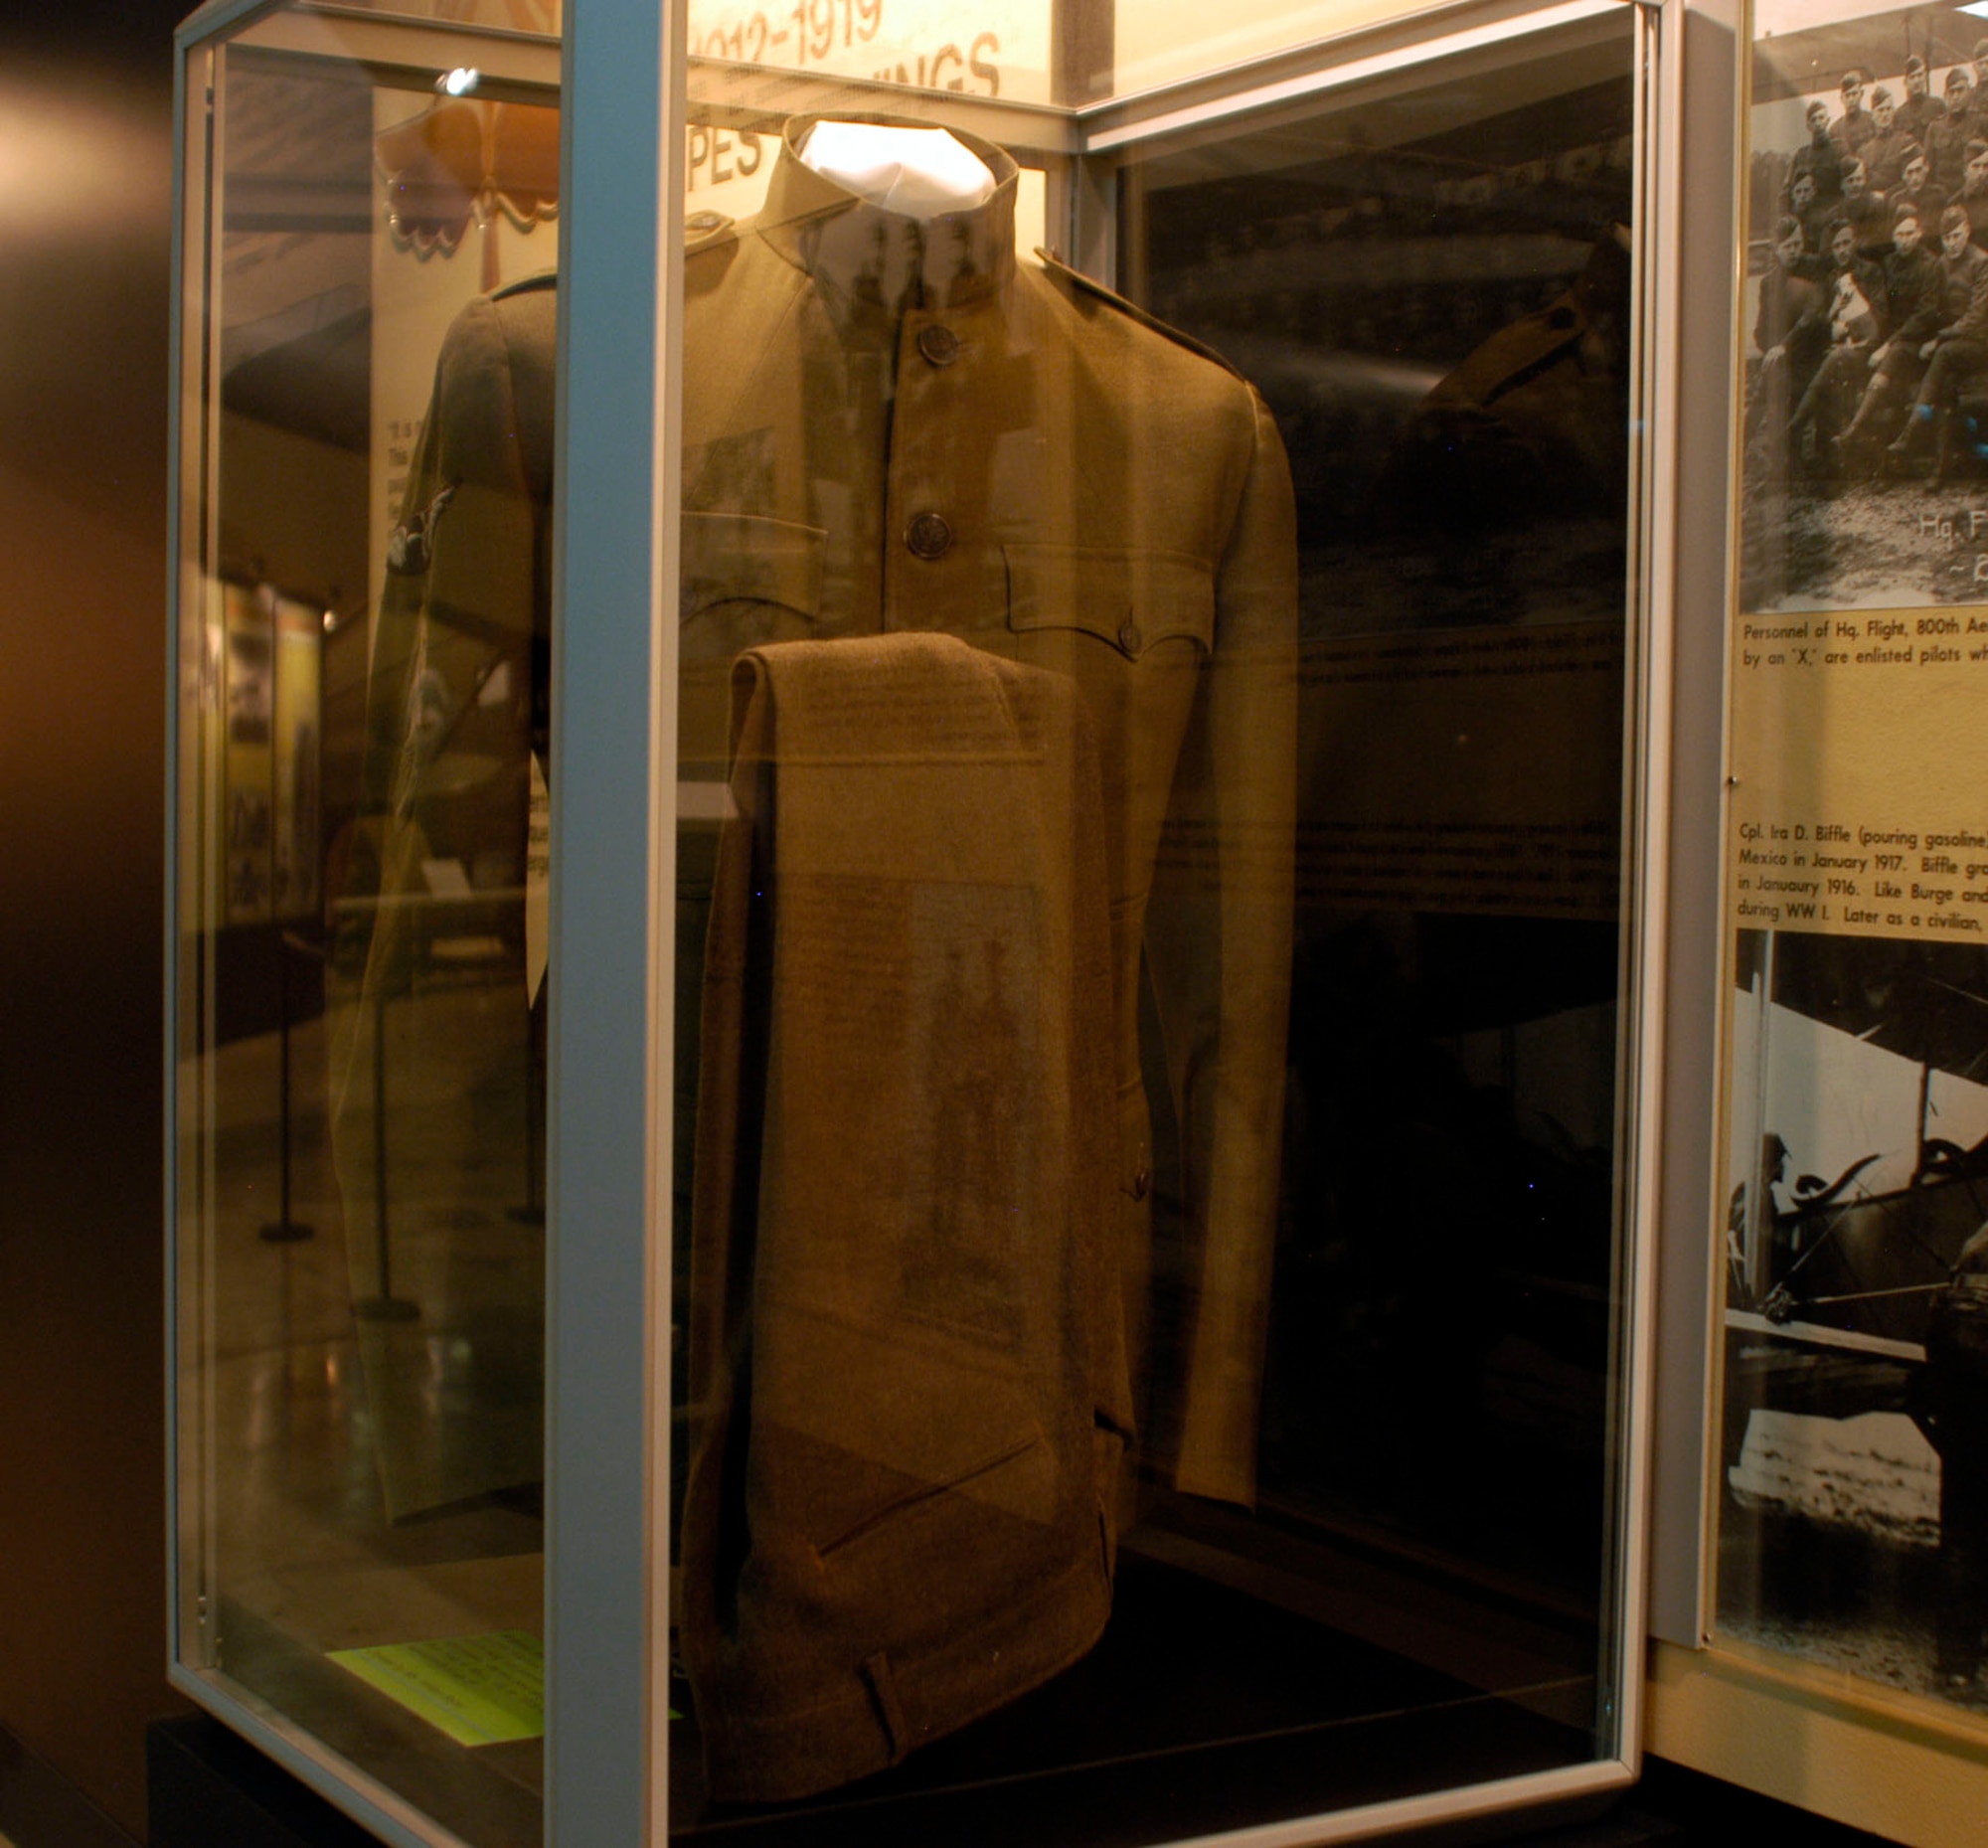 DAYTON, Ohio - Sergeant pilot World War I-era uniform on display in the World War II Gallery at the National Museum of the U.S. Air Force. (U.S. Air Force photo)